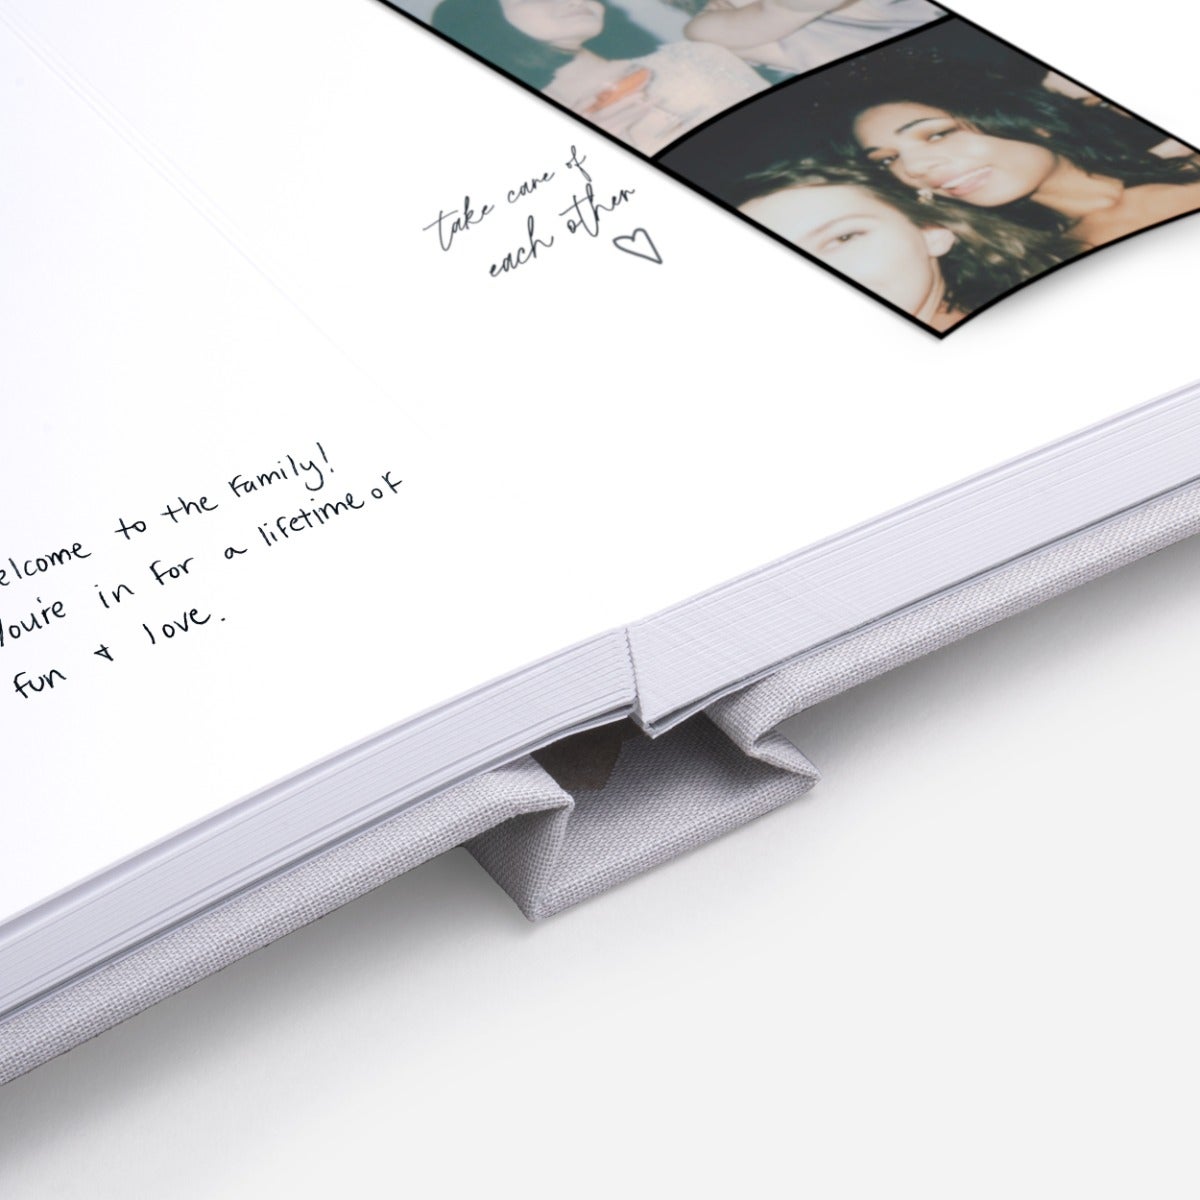 Presonalized Photo albums, Guestbook Album Presonalised Pages with space  for Pictures from PhotoBooh